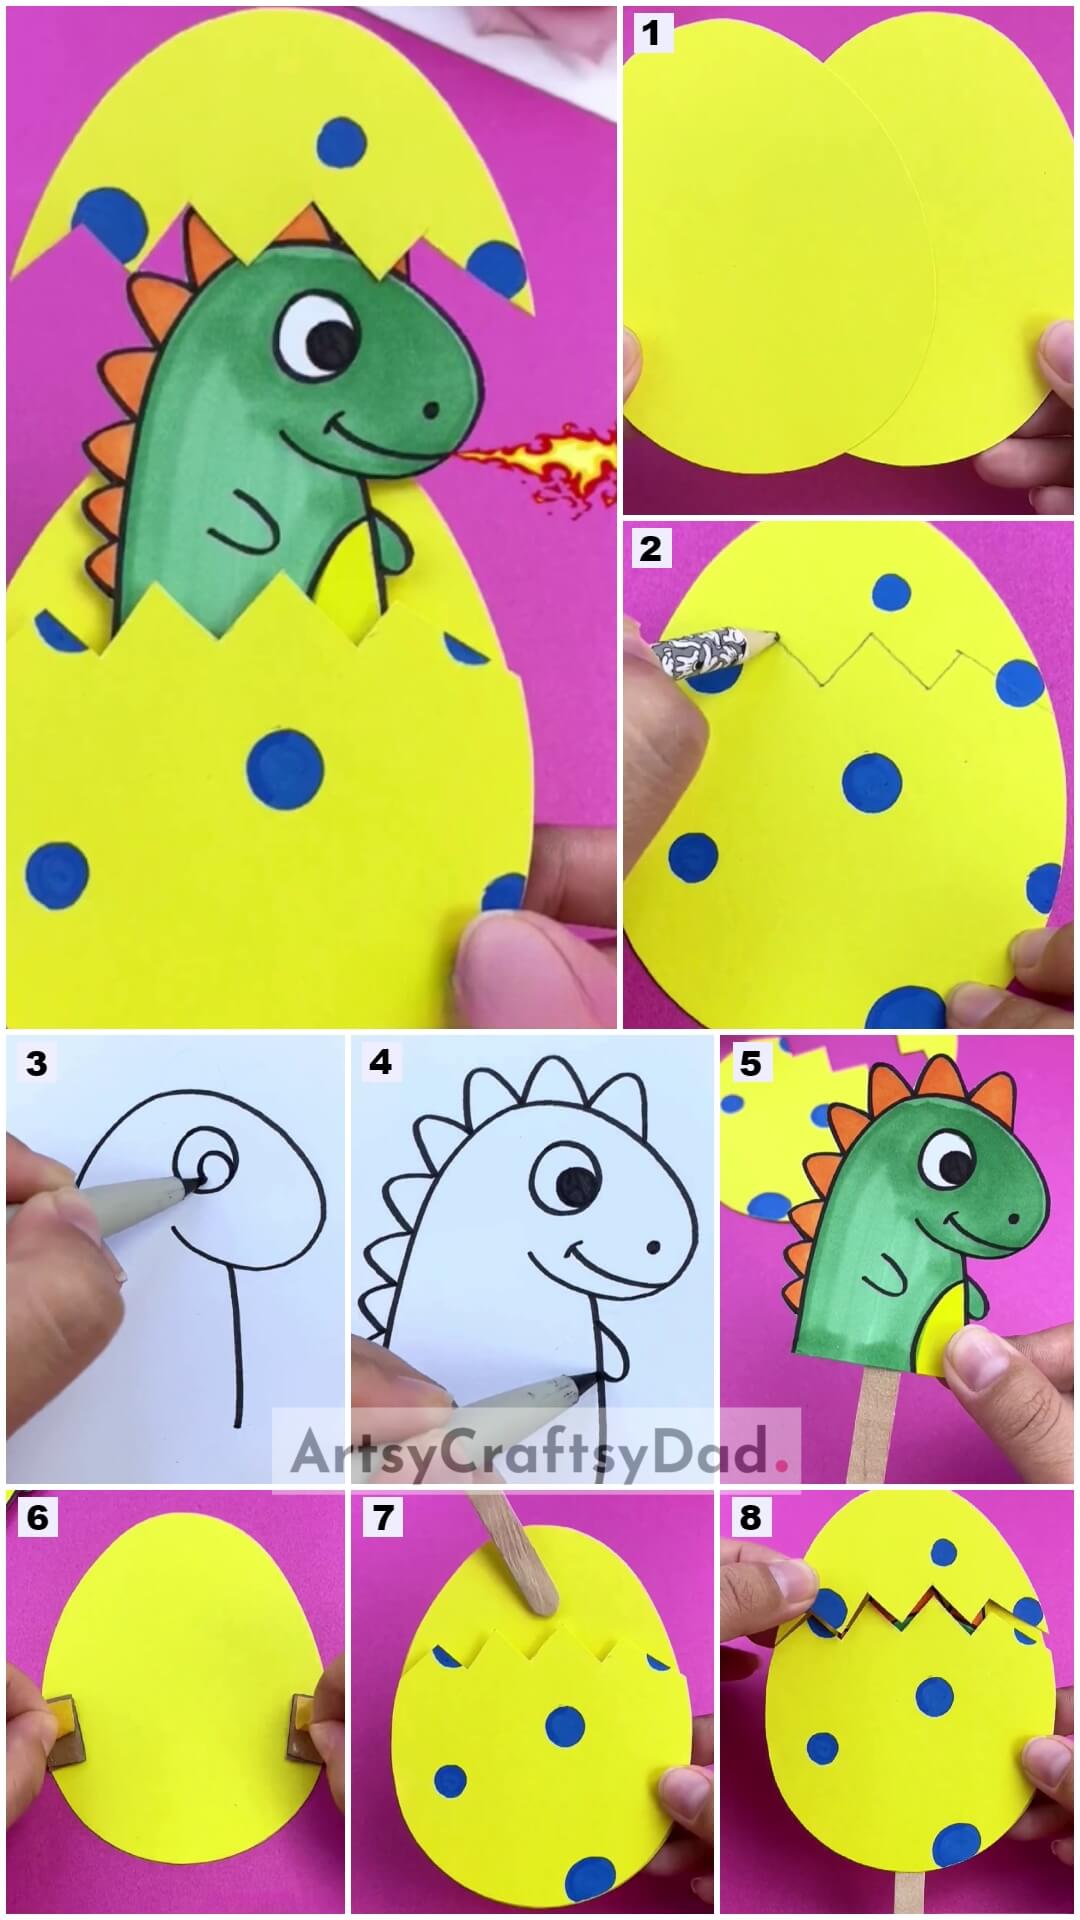 Hatching Dinosaur Paper Art & Craft Tutorial With Popsicle Stick